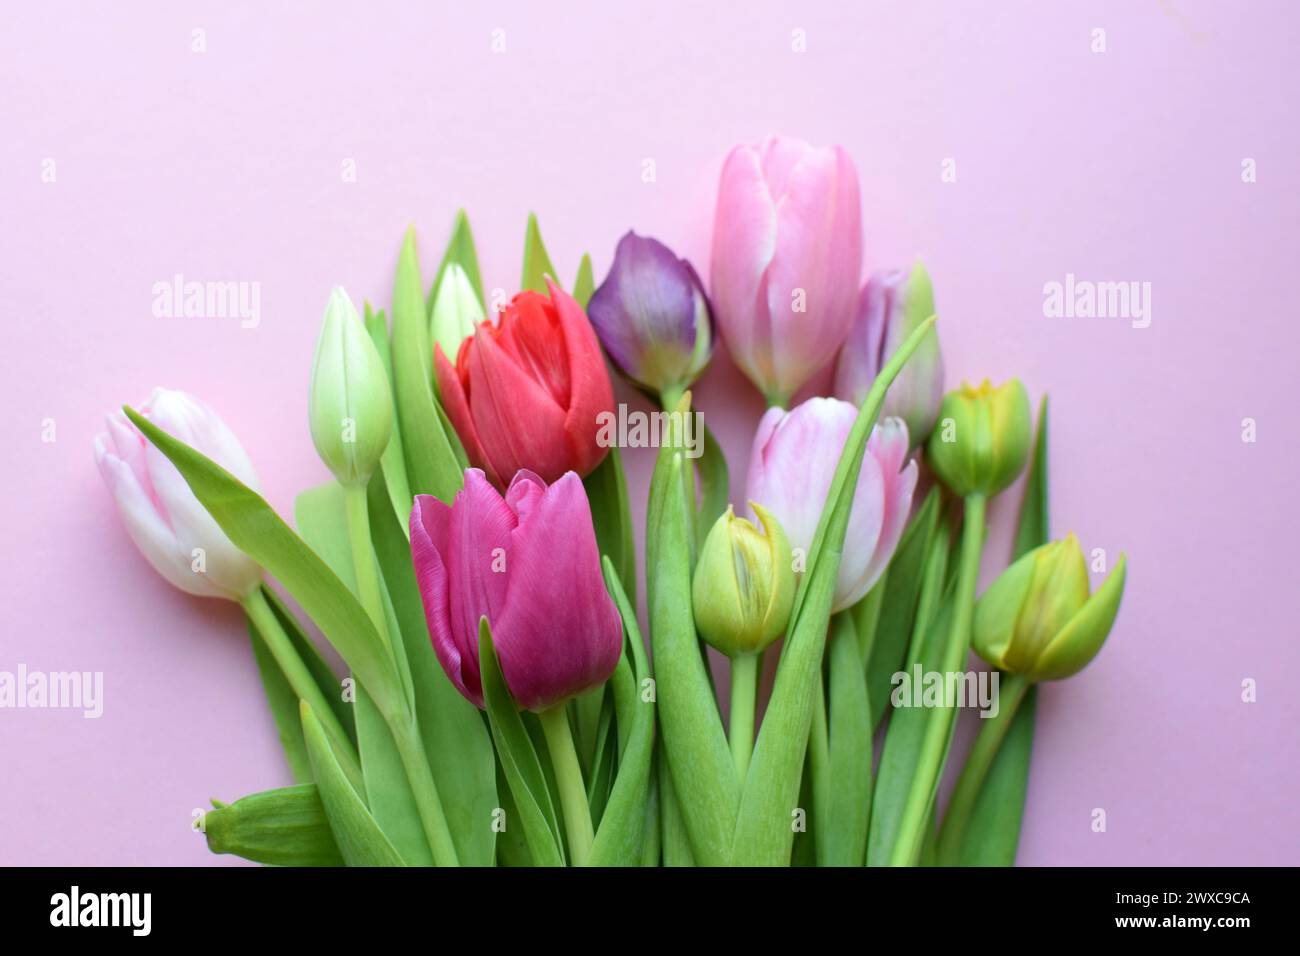 Bouquet of colorful spring tulips for Mother's Day or Women's Day on a  pink background. Stock Photo